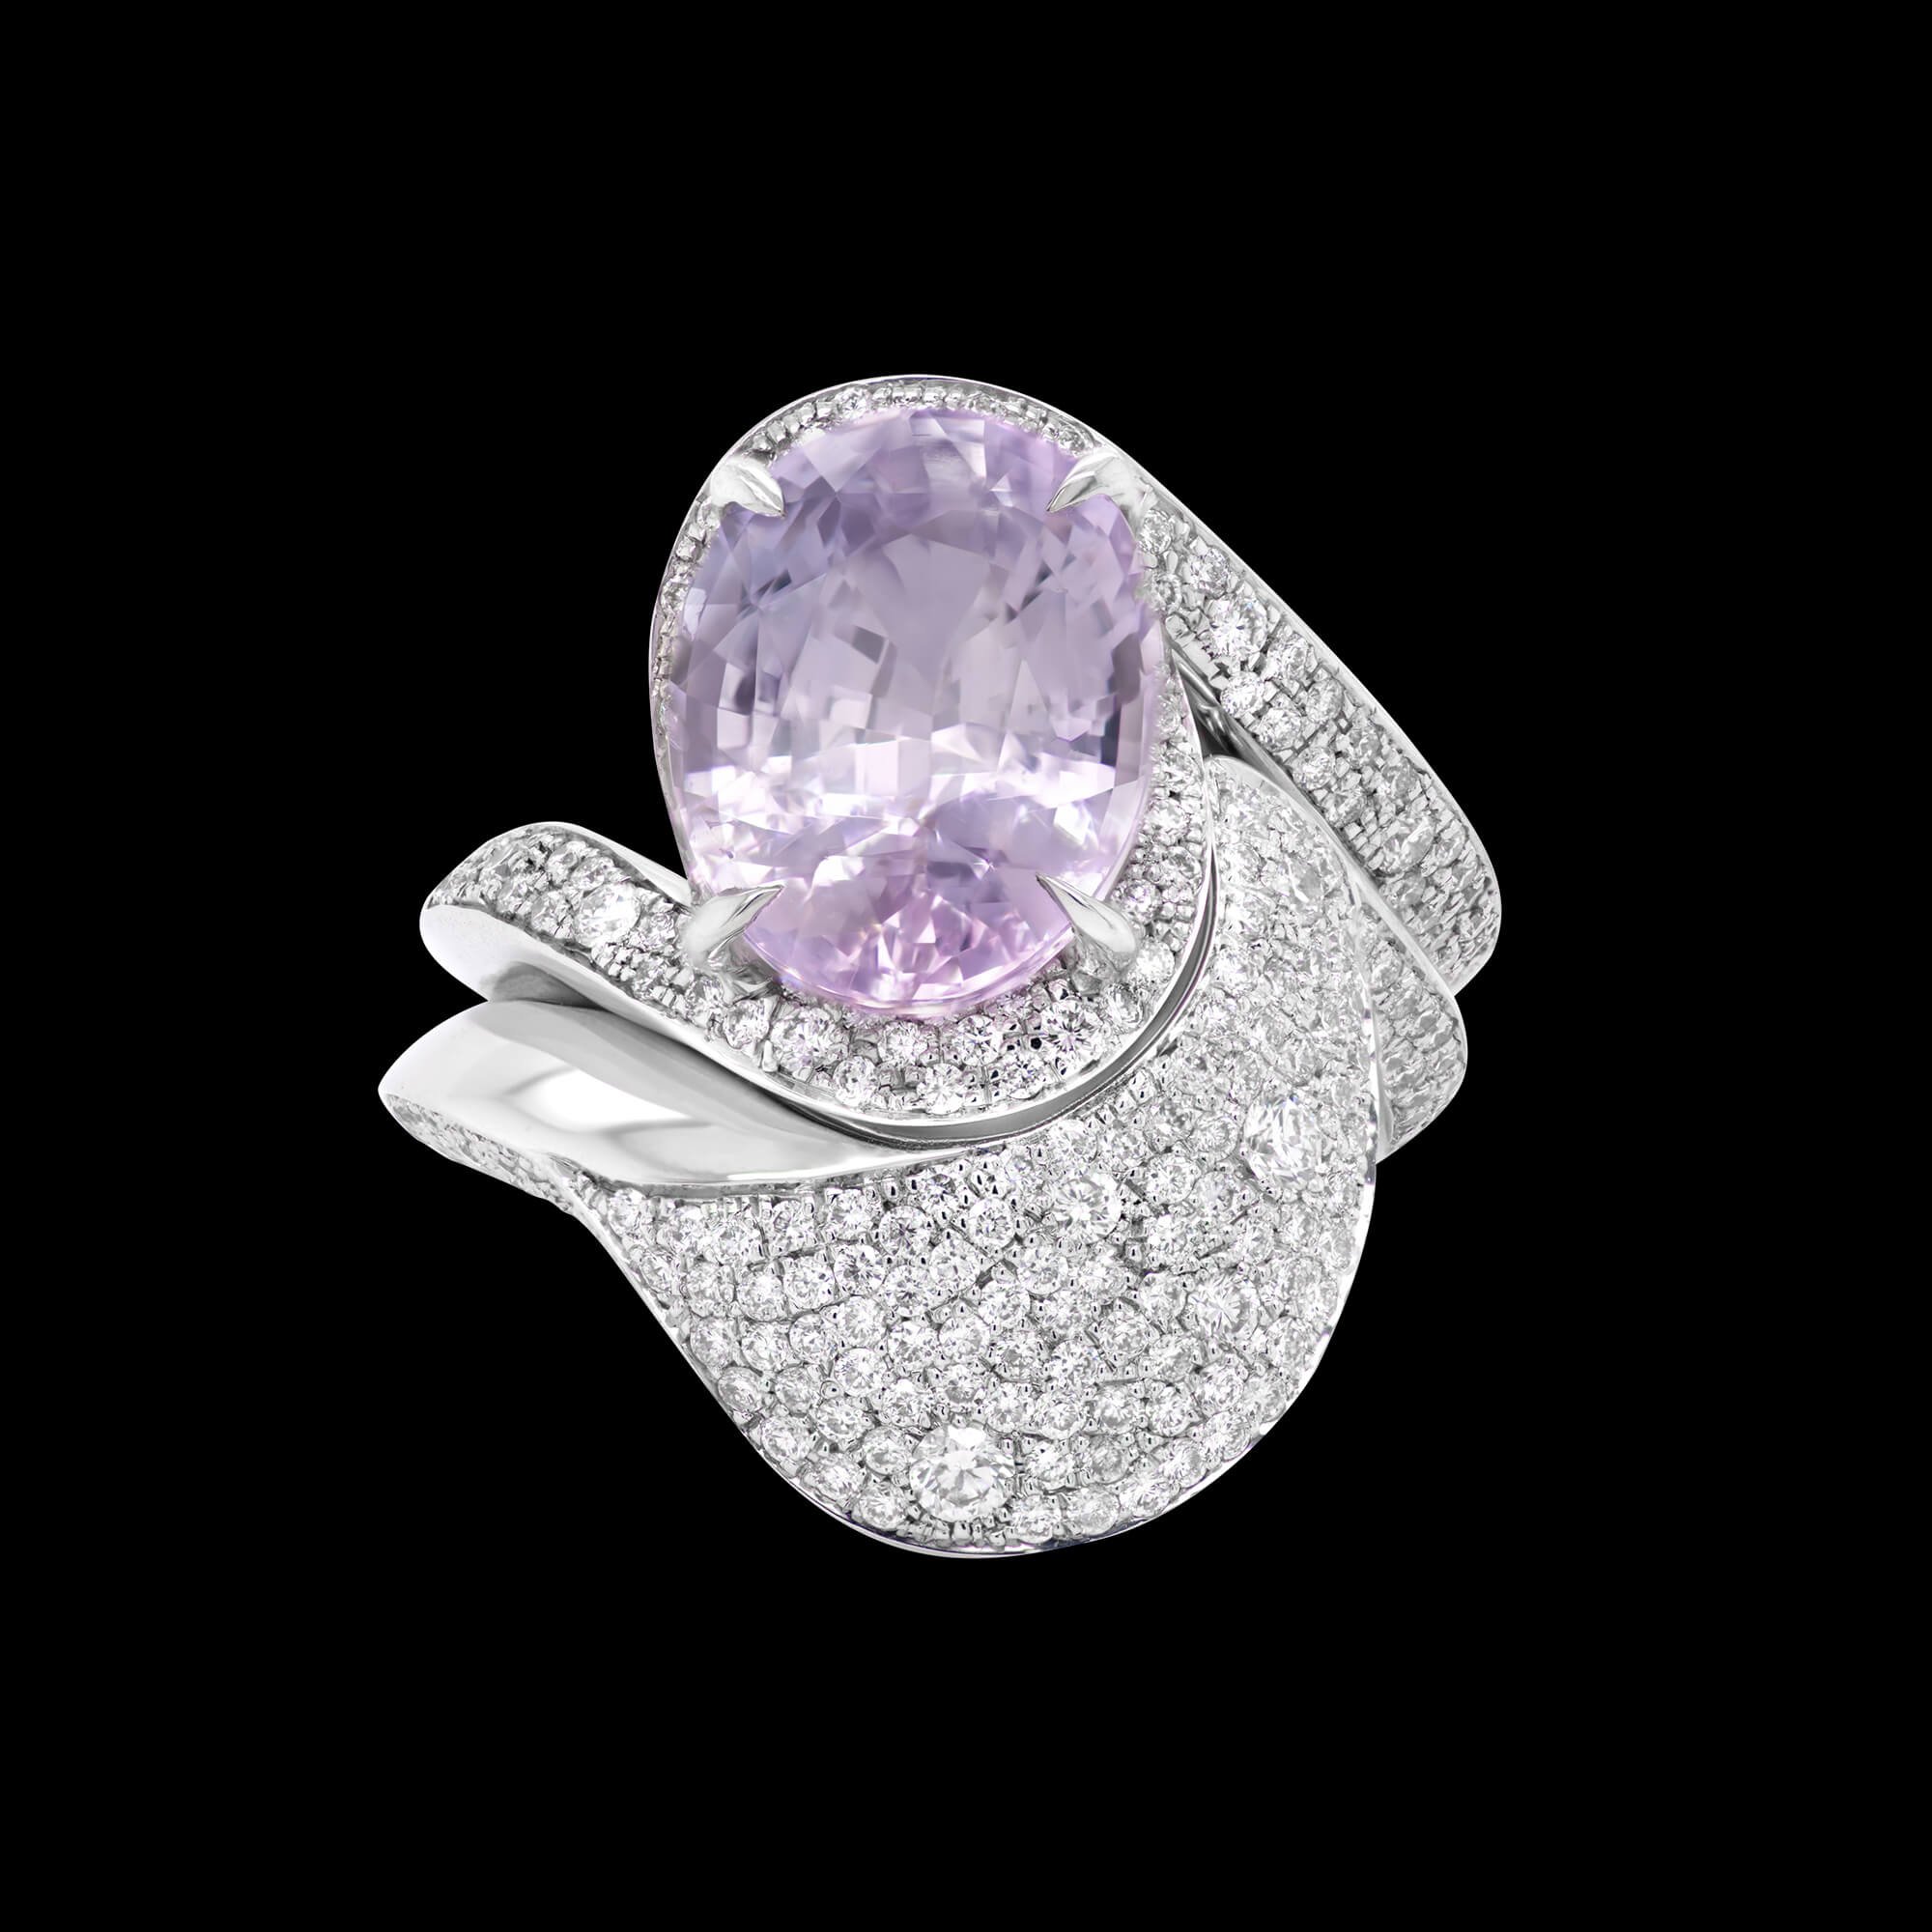 Custom couture engagement ring in 18kt white gold with Swiss-certified natural Ceylon pink-lilac sapphire and brilliant-cut diamonds and interlocking band | Signature Engagement. FRIDA | Fine Jewellery.jpg